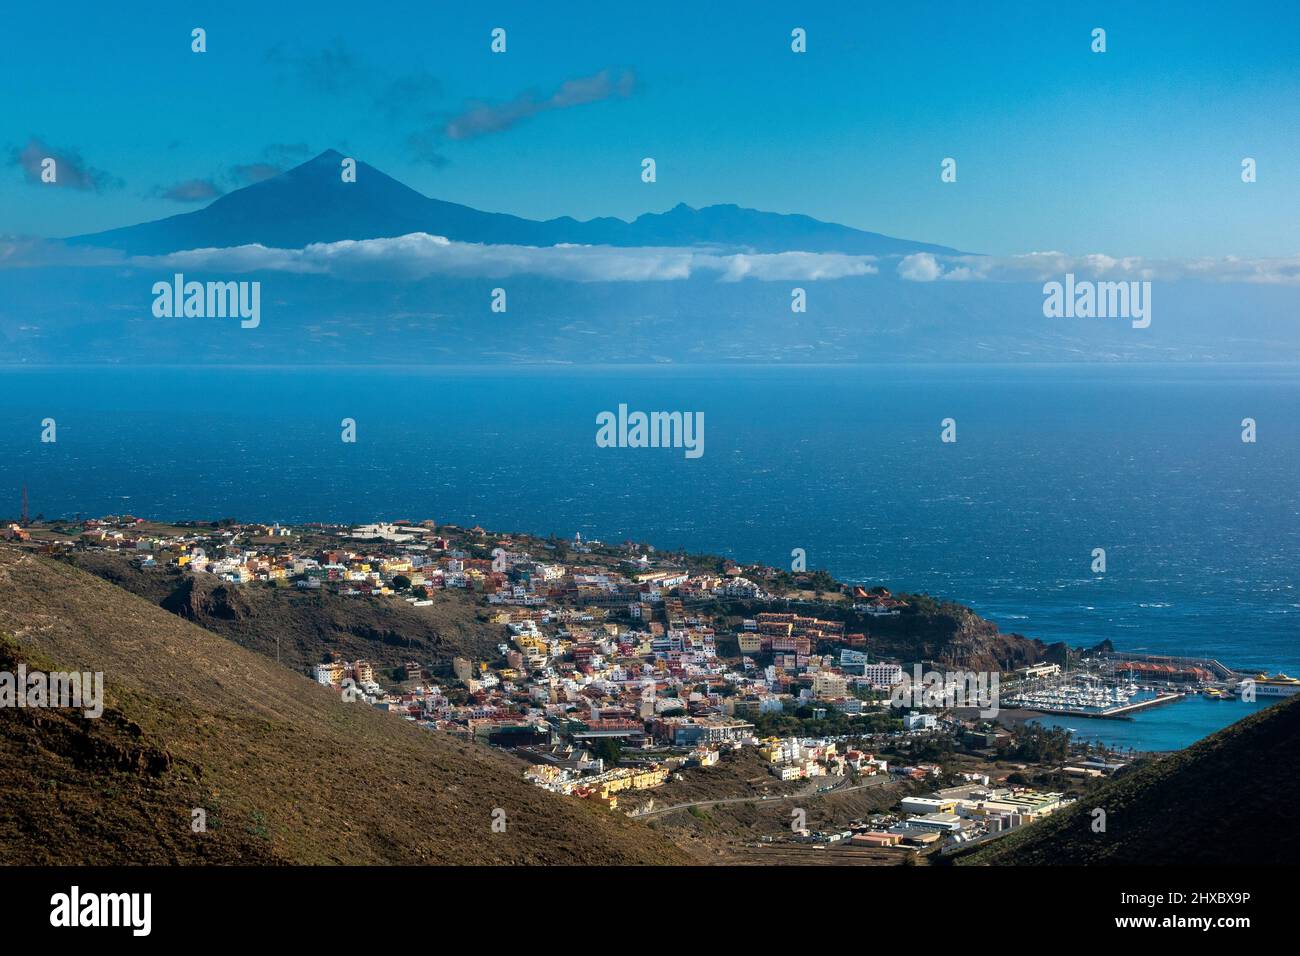 View from La Gomera showing the town of San Sebastian in the foreground and Mount Teide volcano on Tenerife in the distance. Canary Islands, Spain Stock Photo